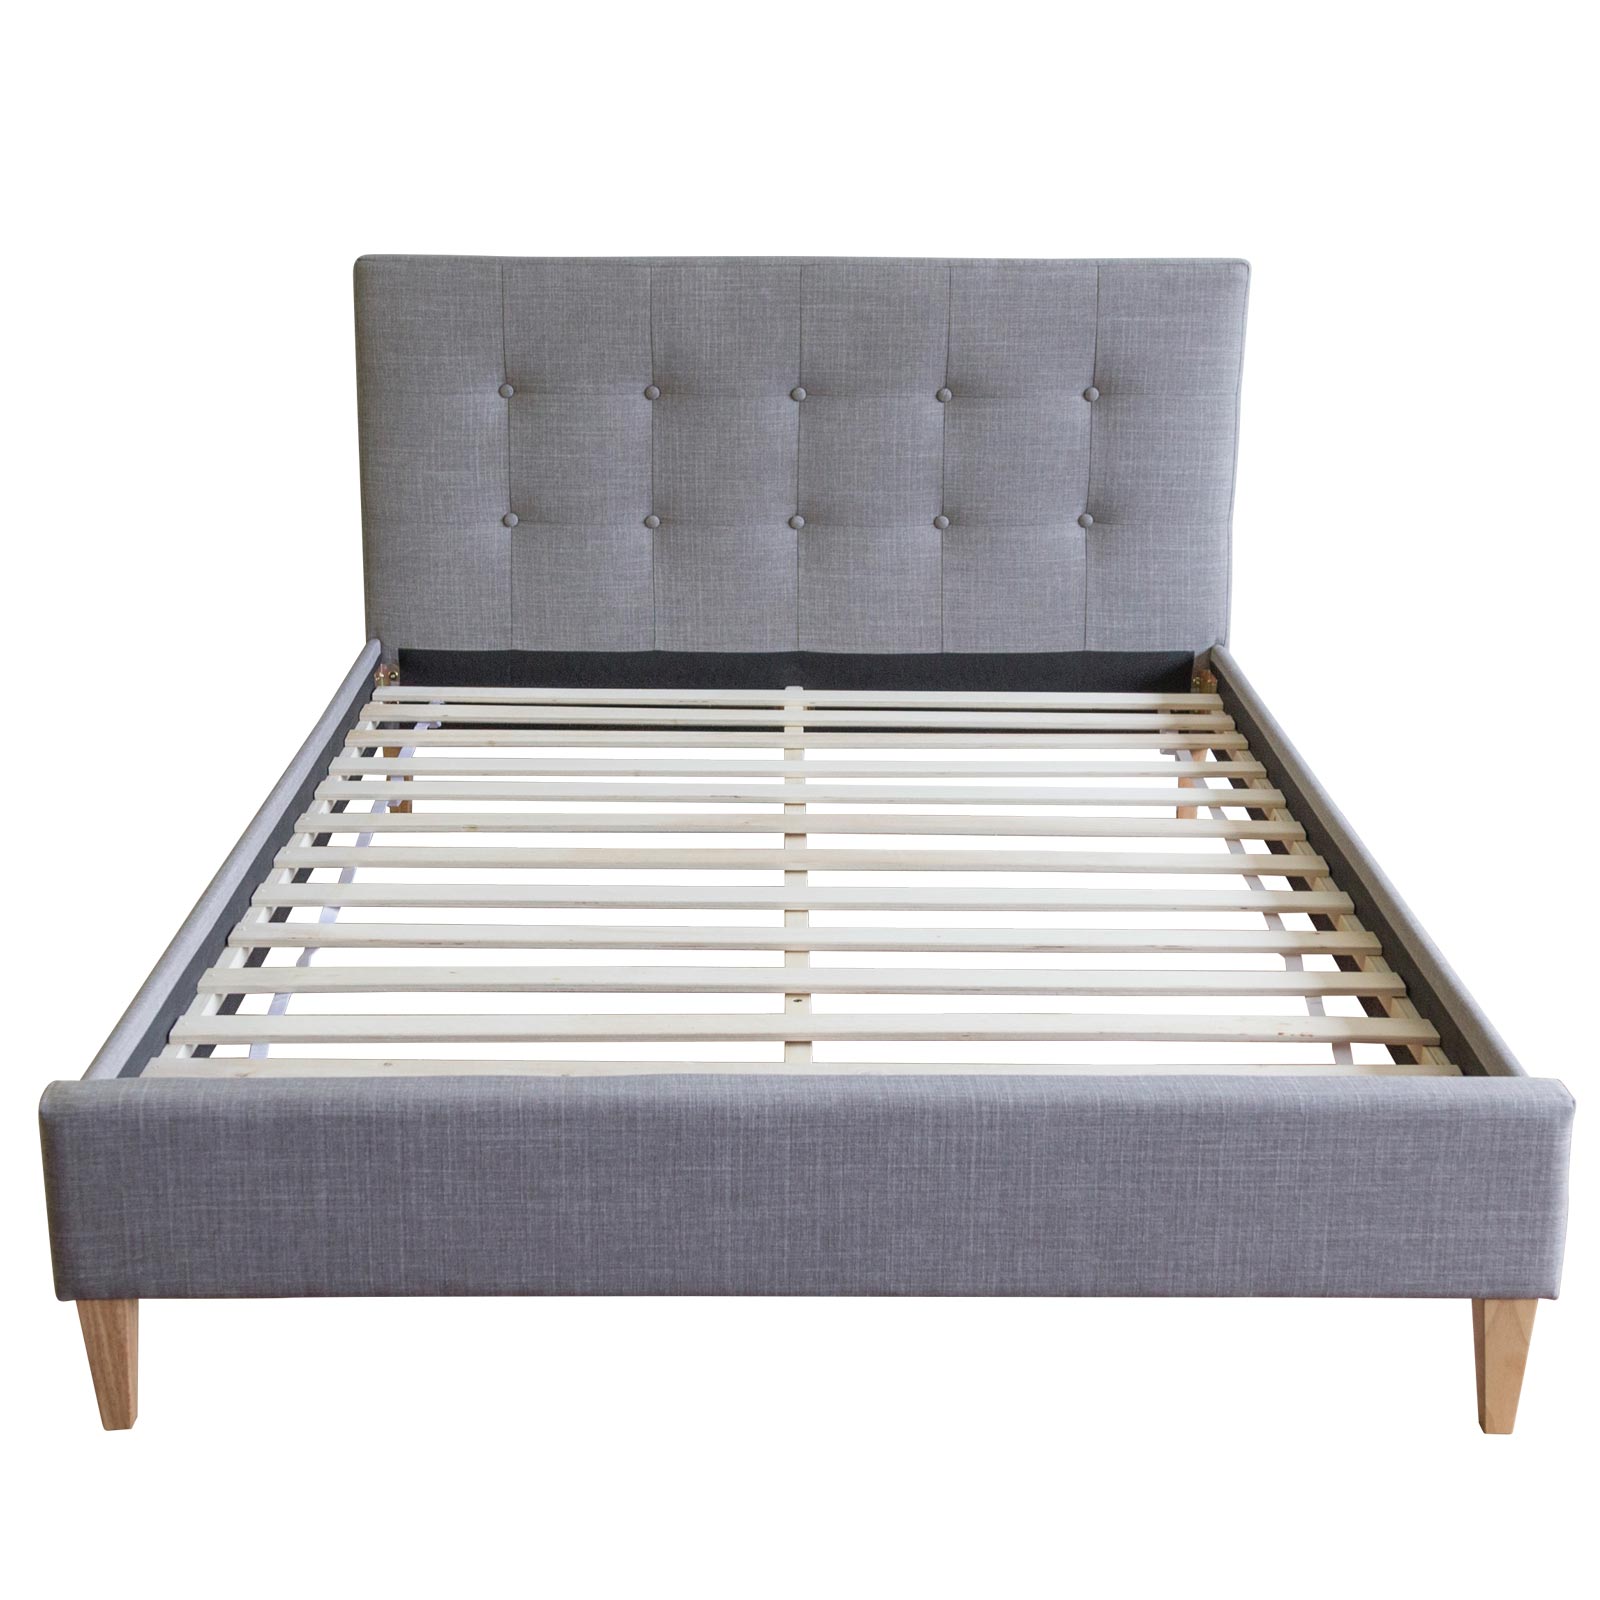 Upholstered Bed Frame Double Bed 180x200 Grey Platform Bed Fabric Headboard